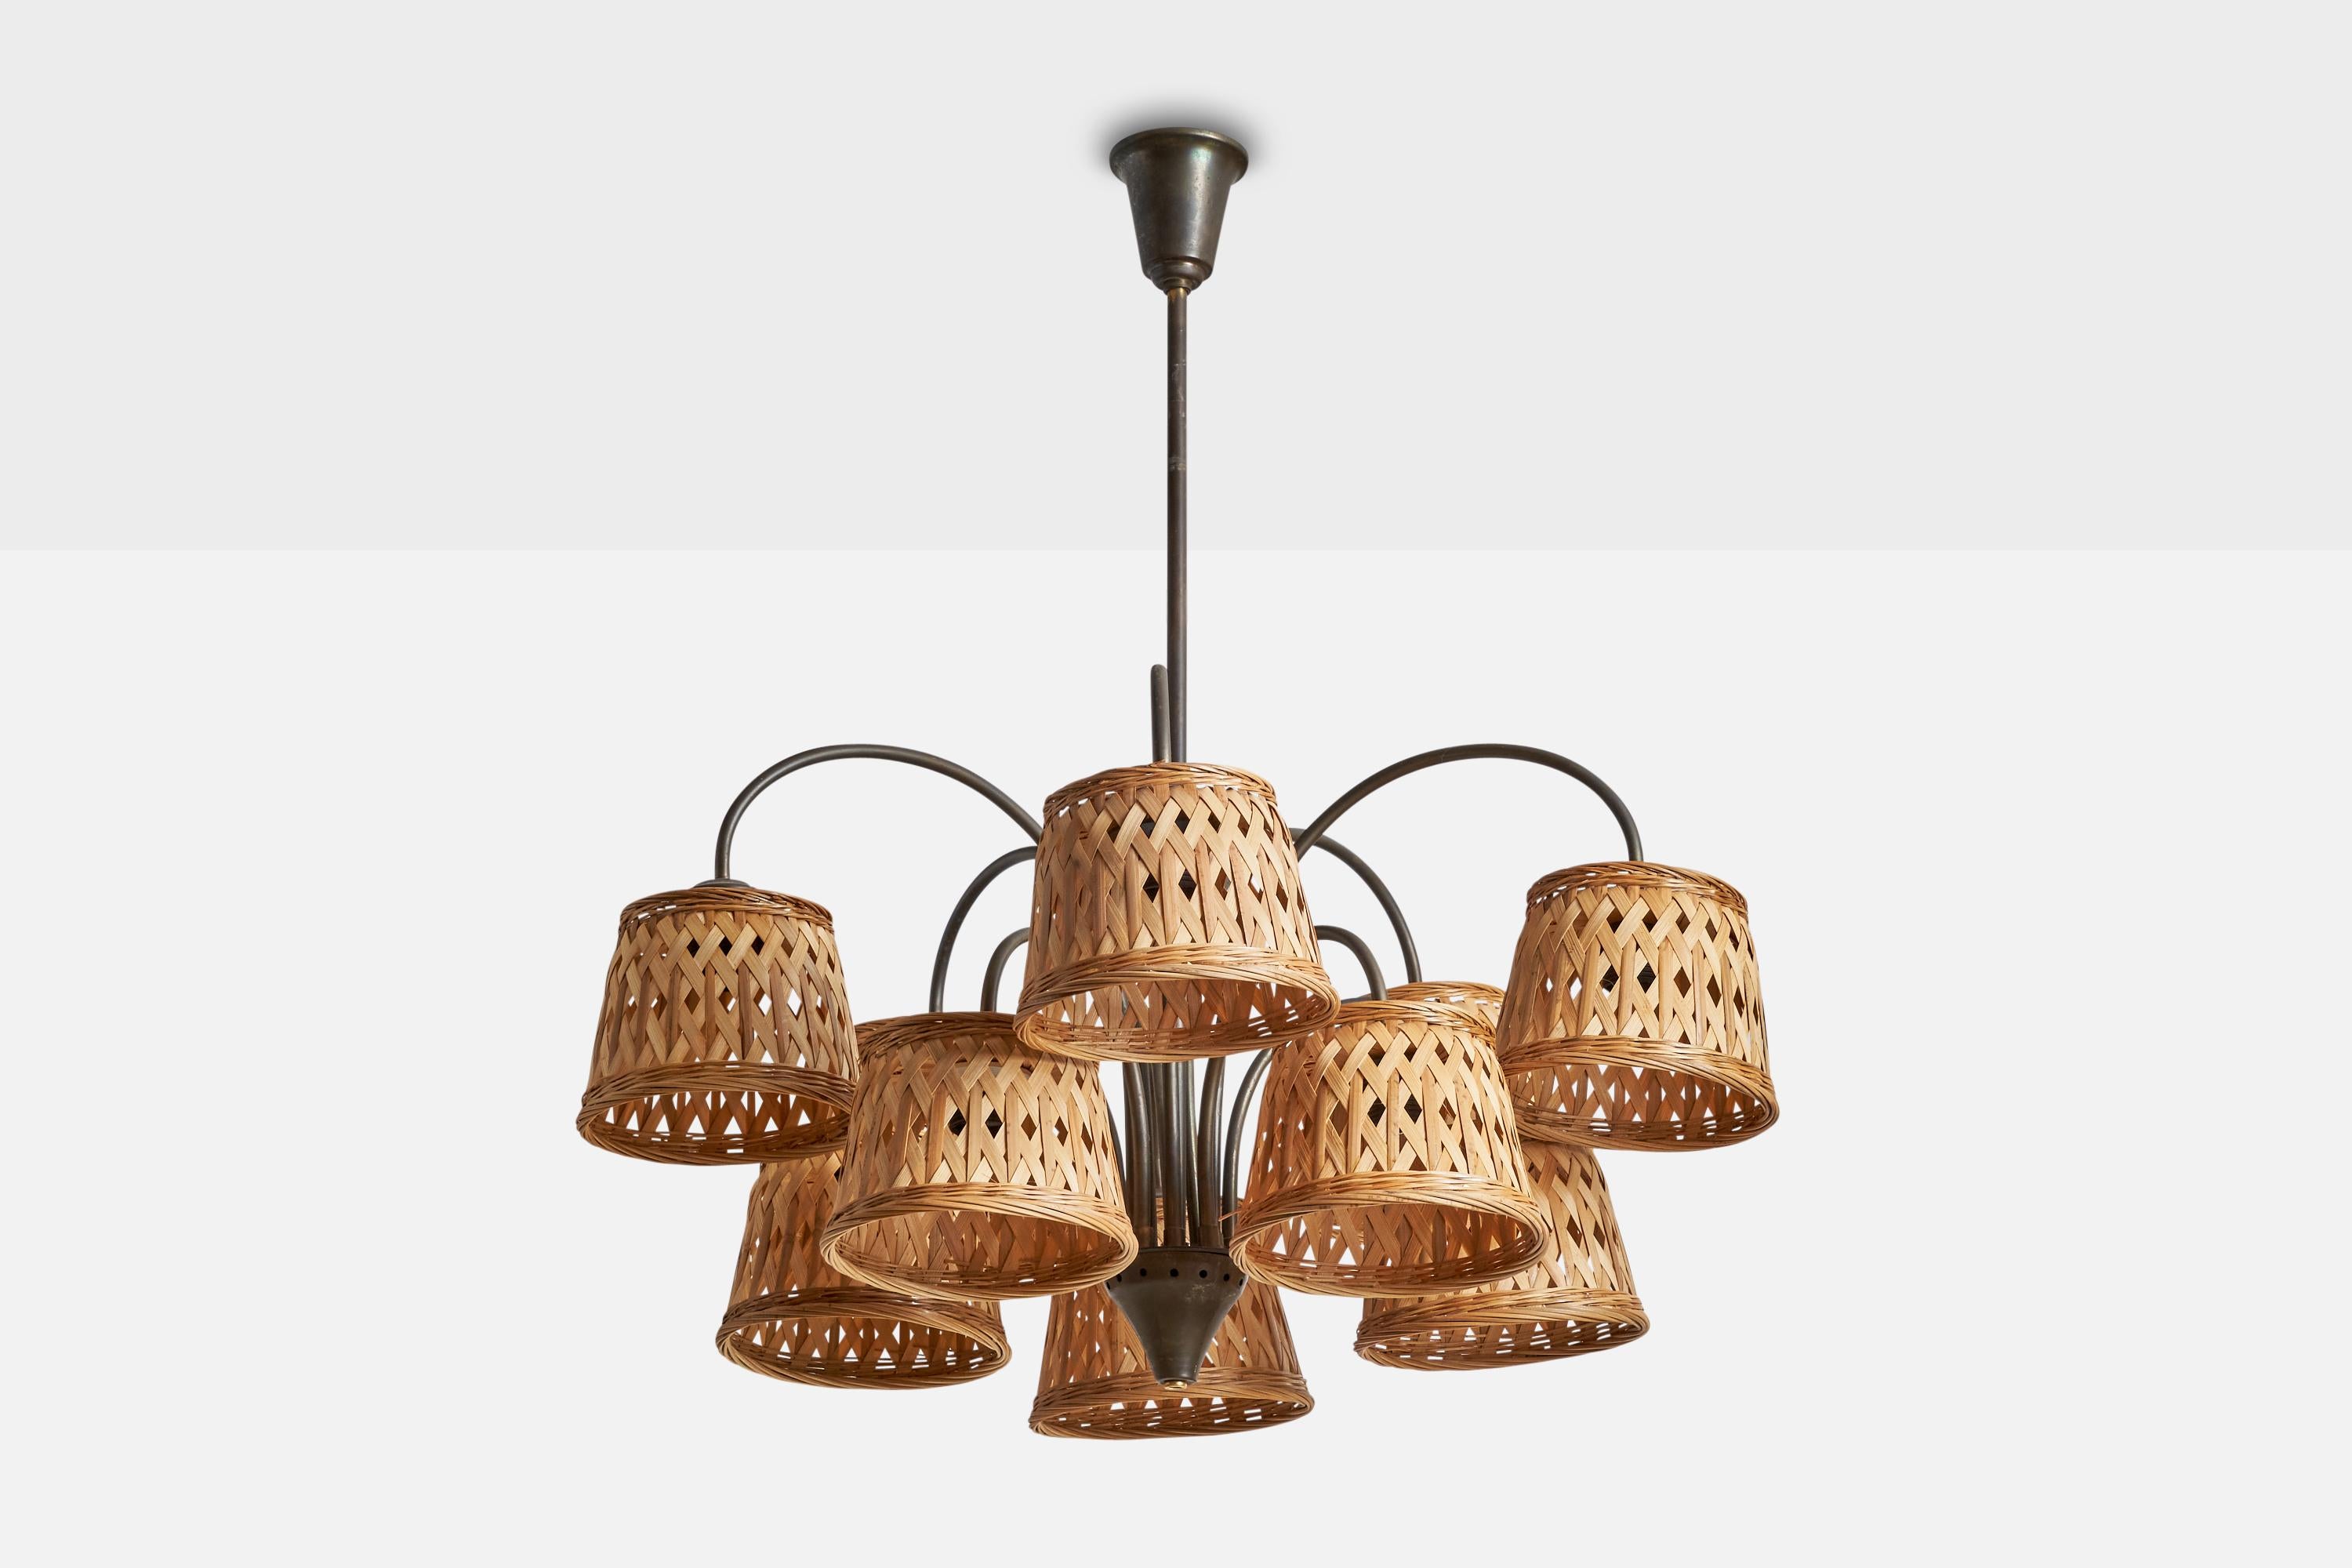 A brass and rattan chandelier designed and produced by Fog & Mørup, Denmark, 1940s.

Dimensions of canopy (inches): 3.5”  H x 3.5” Diameter
Socket takes standard E-26 bulbs. 10 sockets.There is no maximum wattage stated on the fixture. All lighting